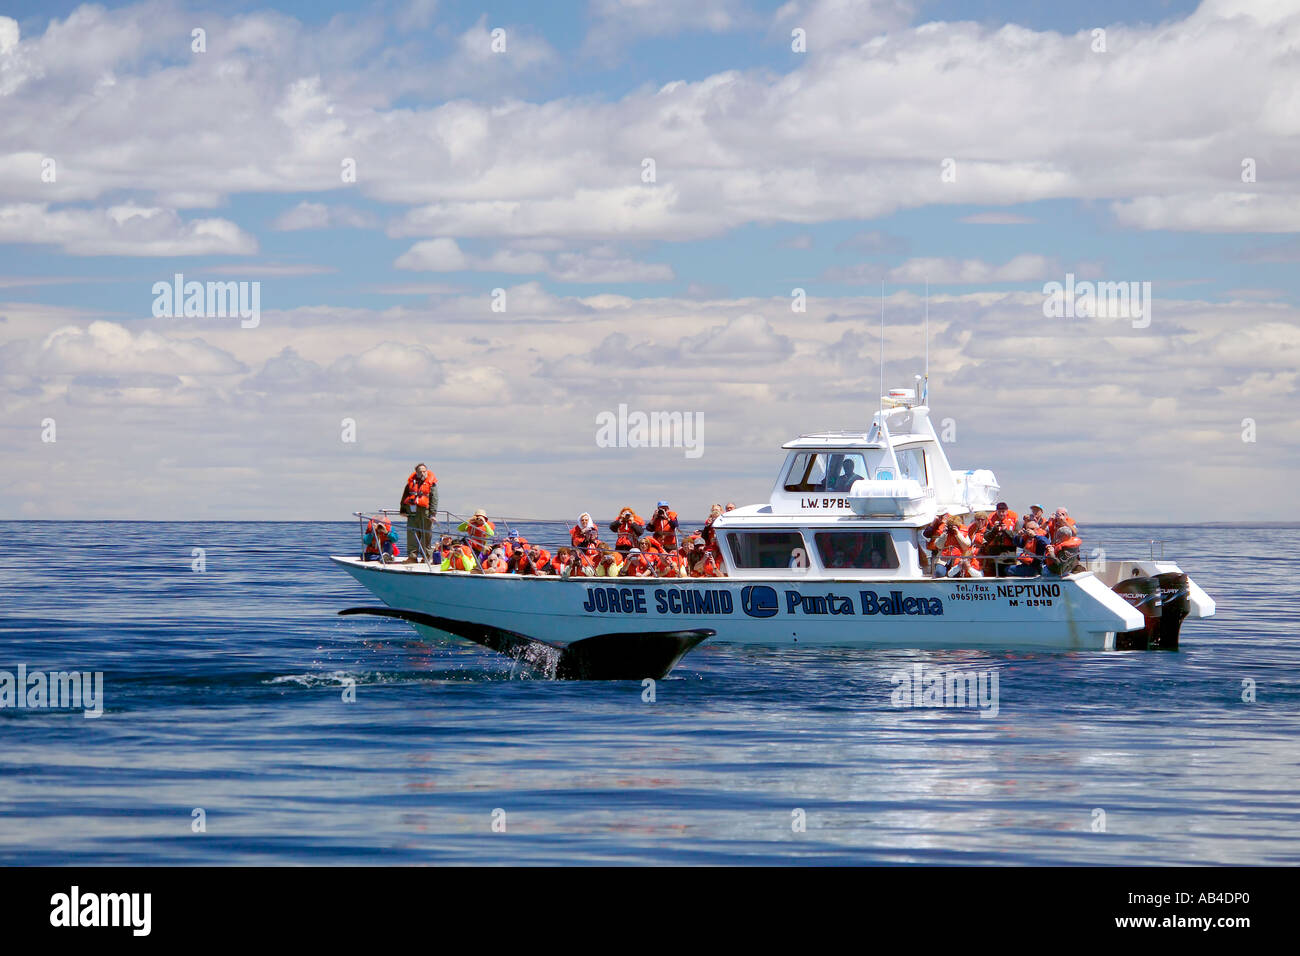 A boat full of tourists whale watching with their cameras ready as the tail dips below the surface of the water. Stock Photo